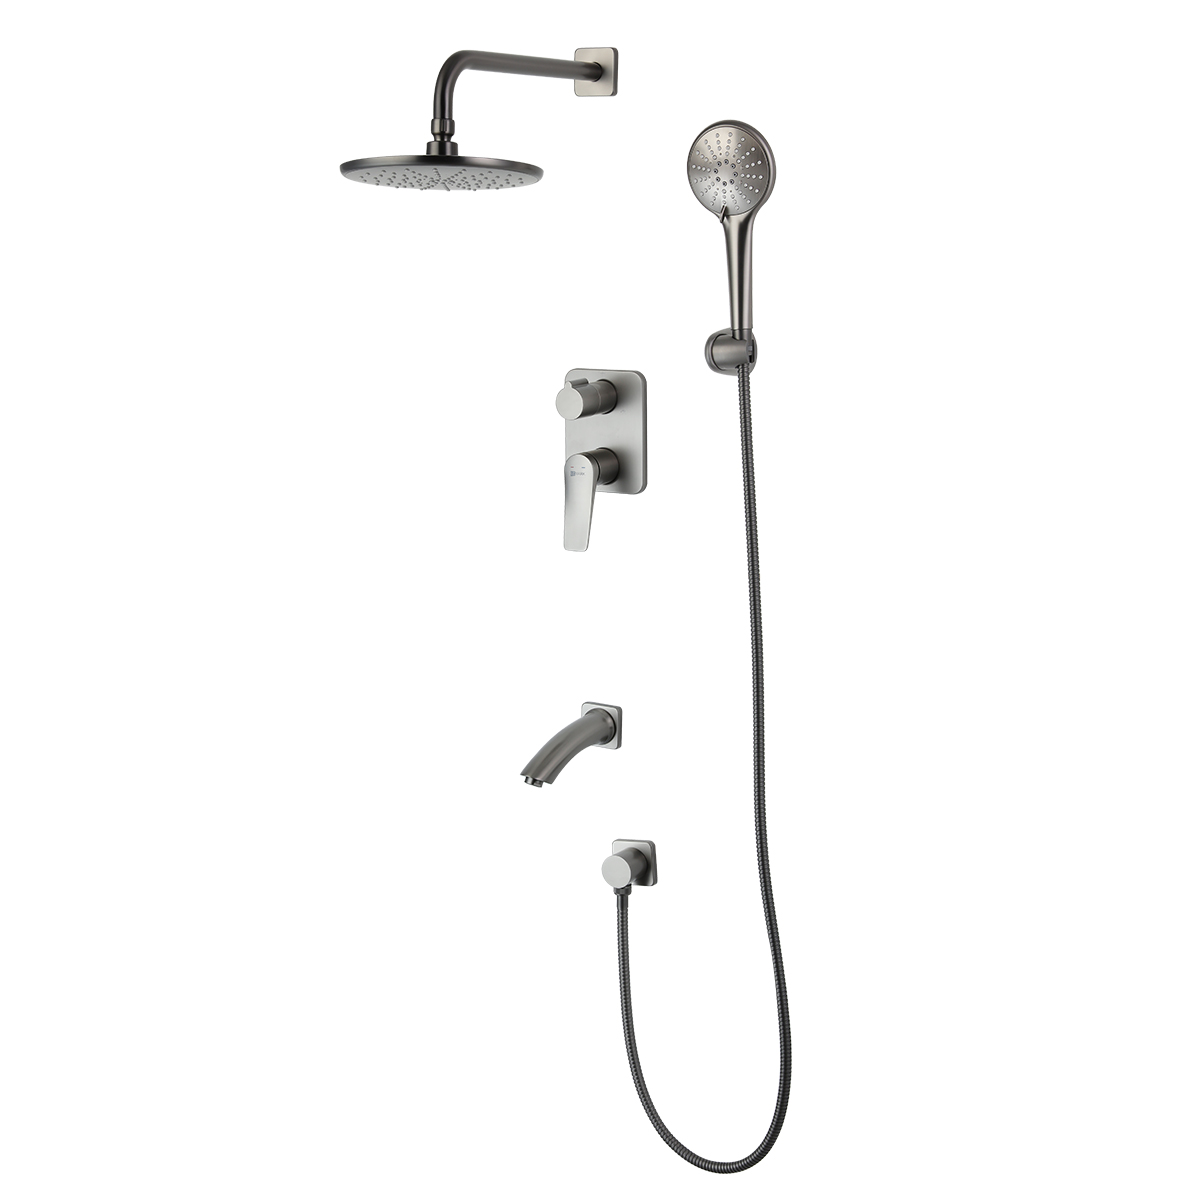 LM3722GM Built-in bath and shower faucet